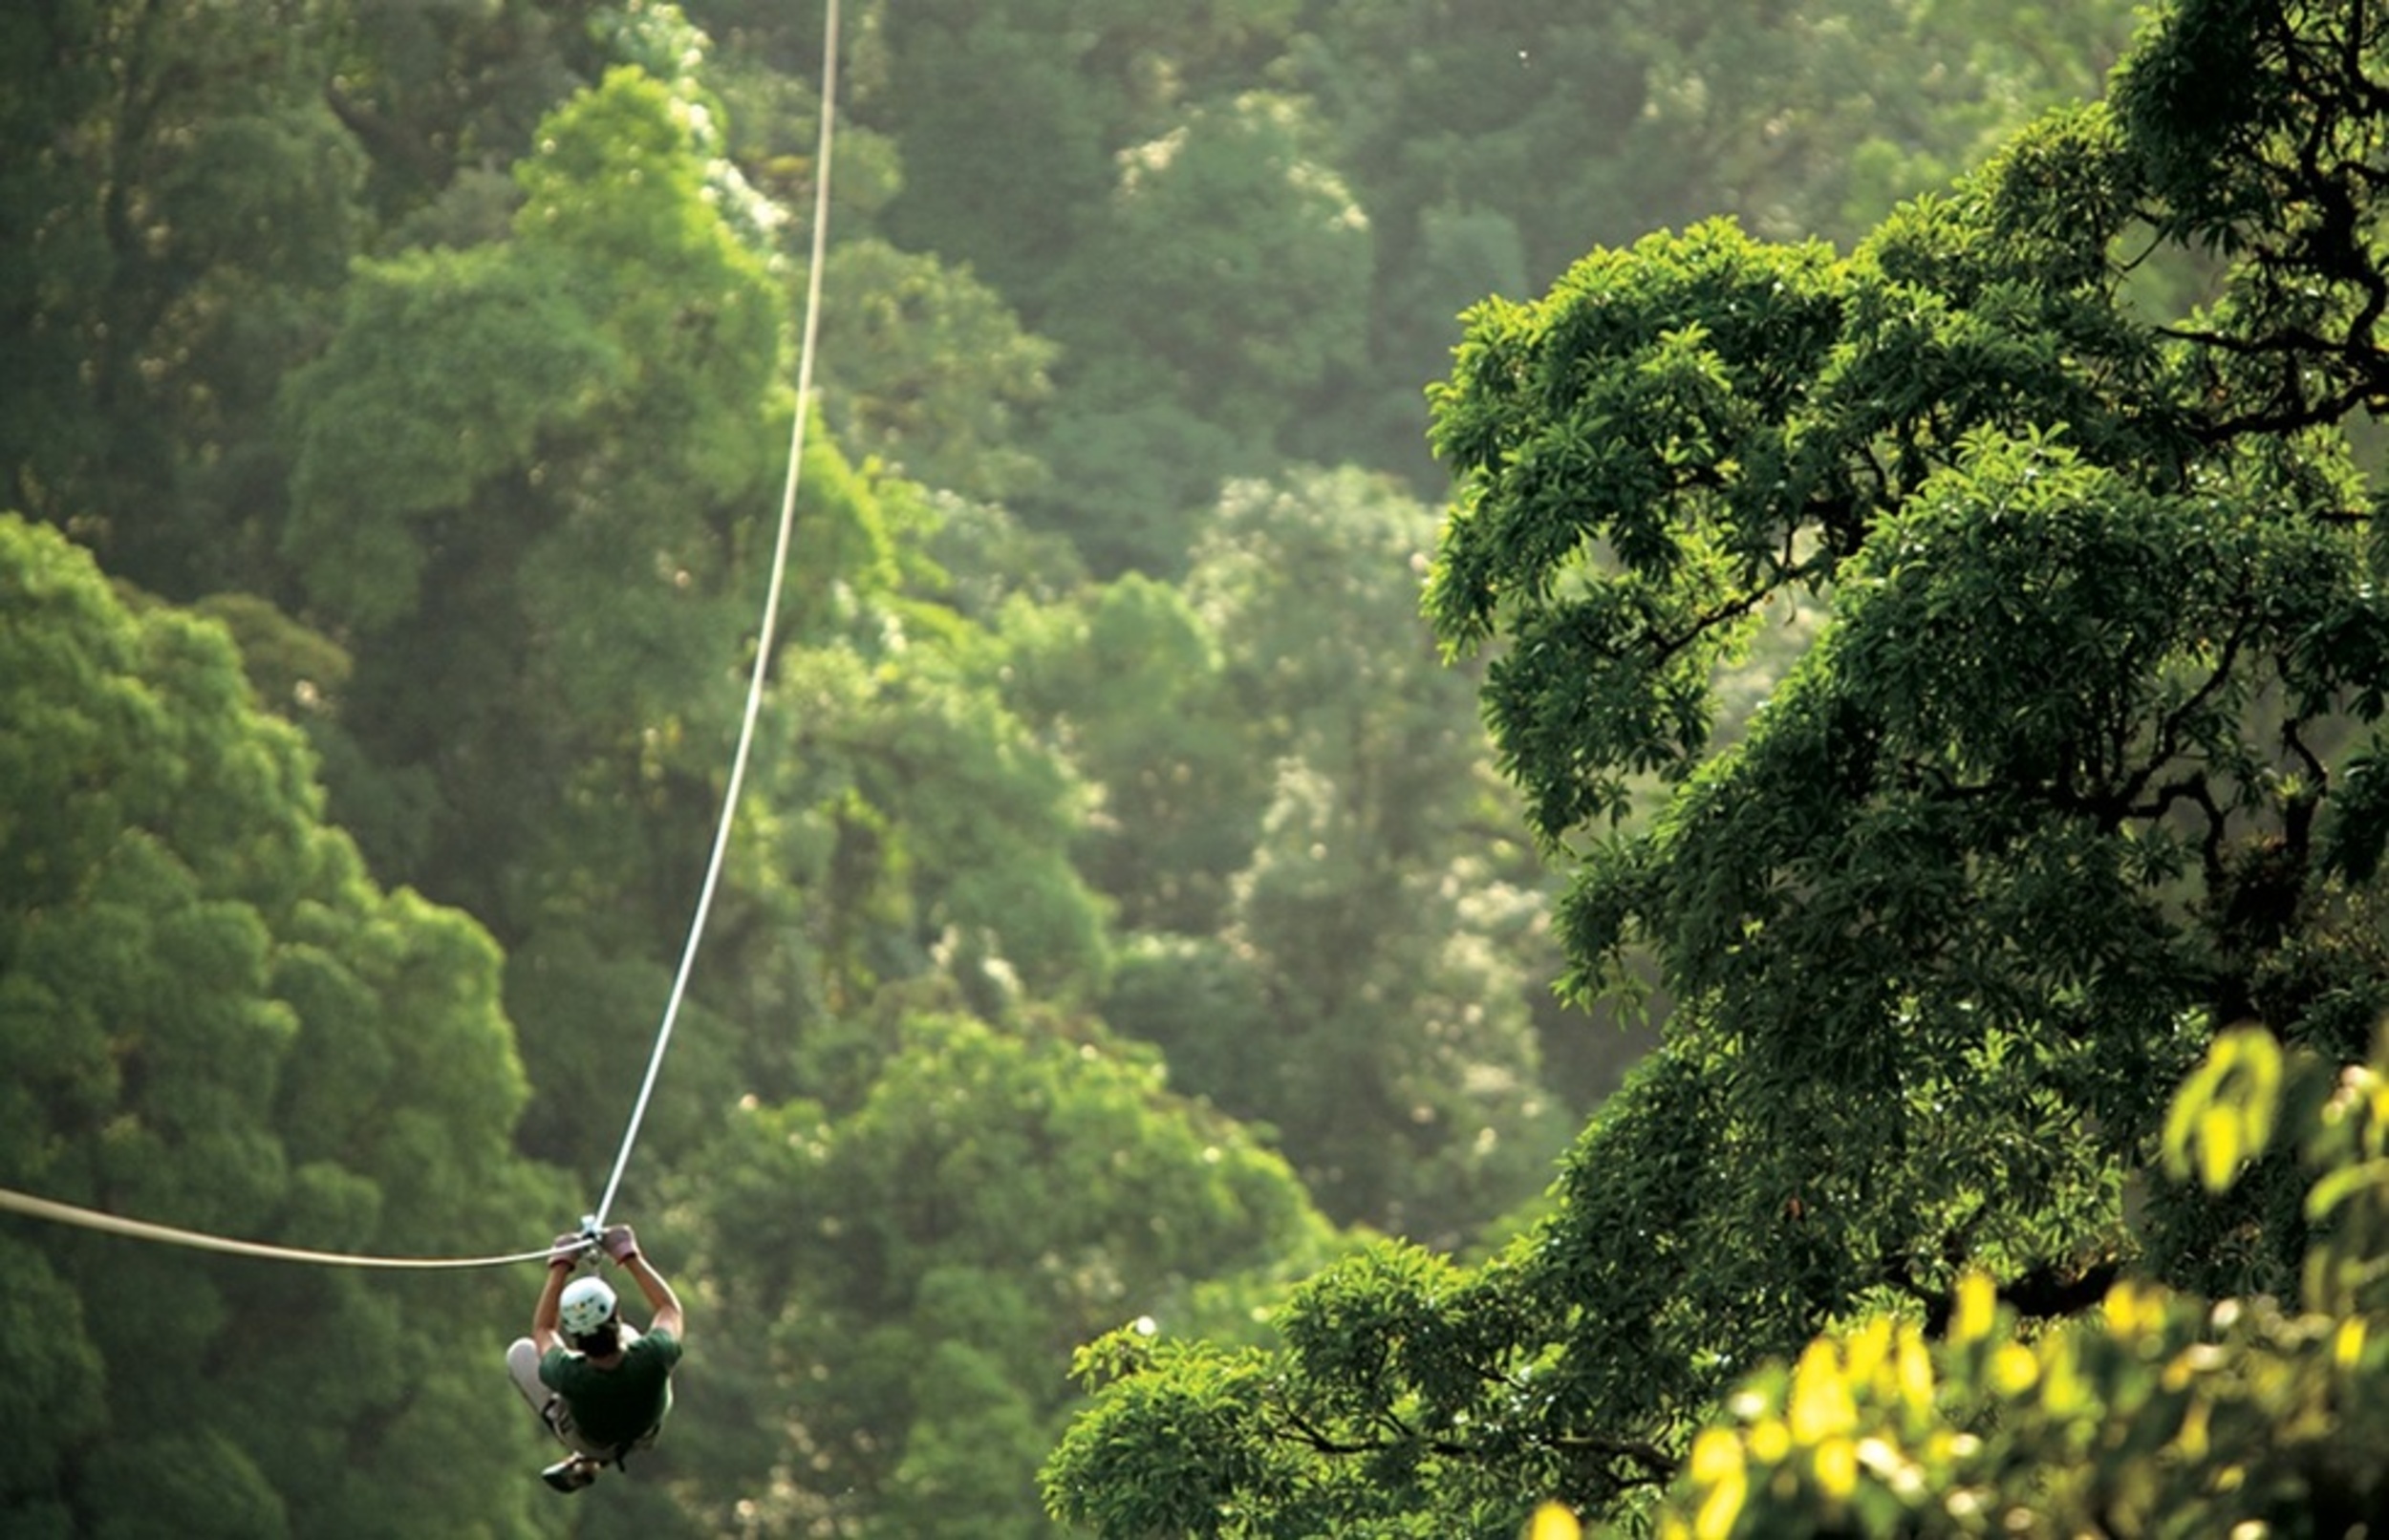 <p>Soar above forests and rivers on a series of scenic ziplines, then jump off a 70-foot platform with a bungee cord tied around your waist. It's an adrenaline junkie's dream, best explored in places like Monteverde. </p><p><a href='https://www.msn.com/en-us/community/channel/vid-cj9pqbr0vn9in2b6ddcd8sfgpfq6x6utp44fssrv6mc2gtybw0us'>Follow us on MSN to see more of our exclusive lifestyle content.</a></p>